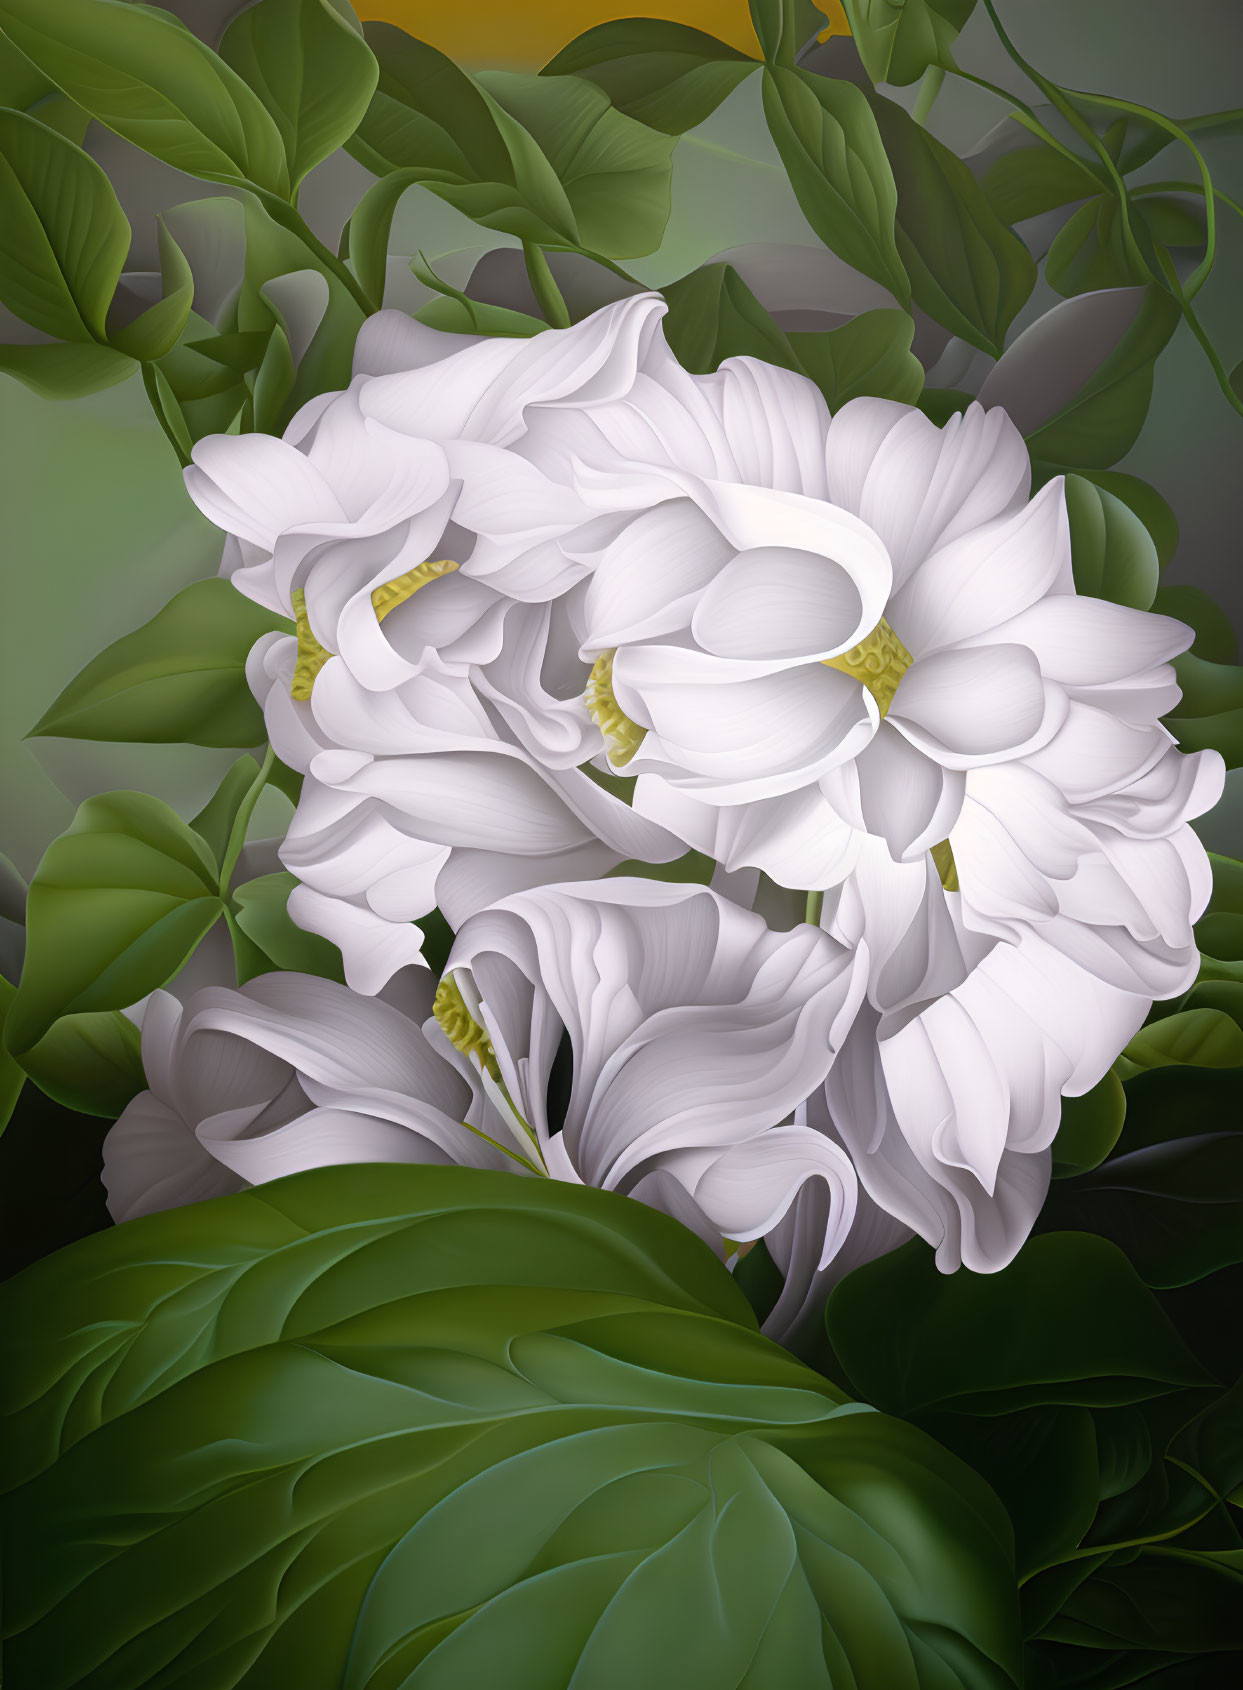 Detailed digital artwork of white magnolia flowers and green leaves.